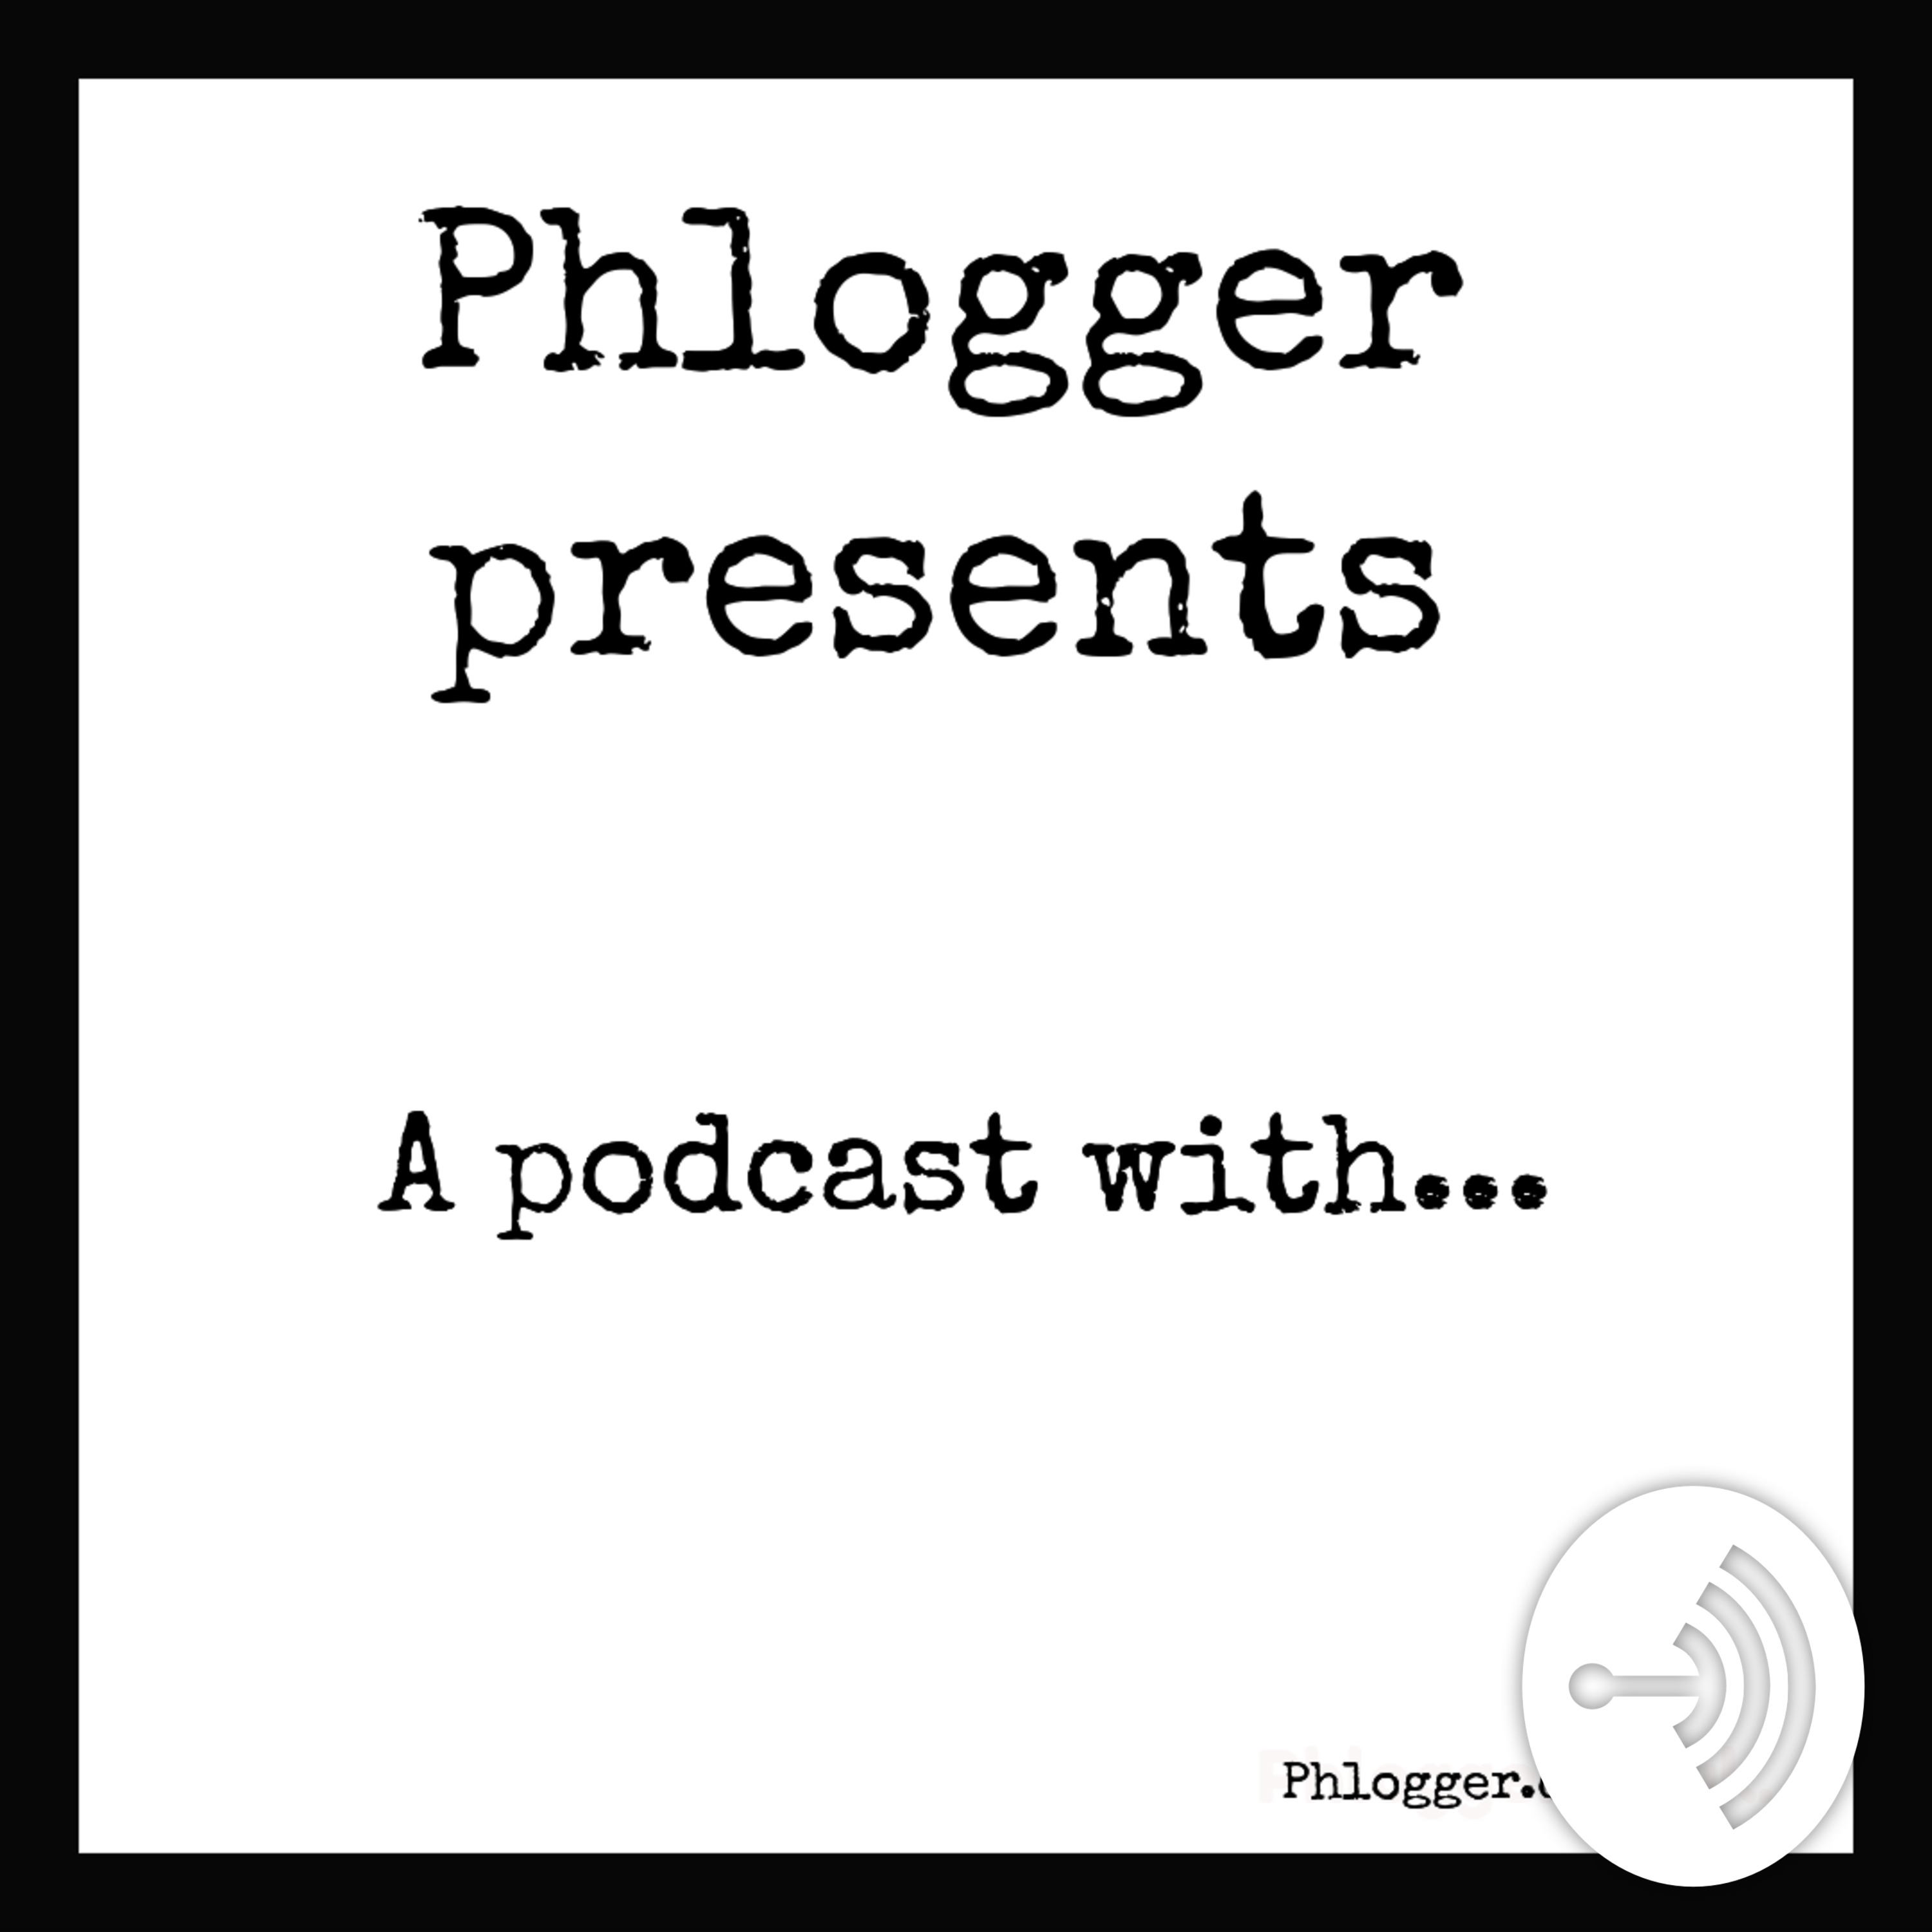 Photography insights by Phlogger - industry interviews in the photography world